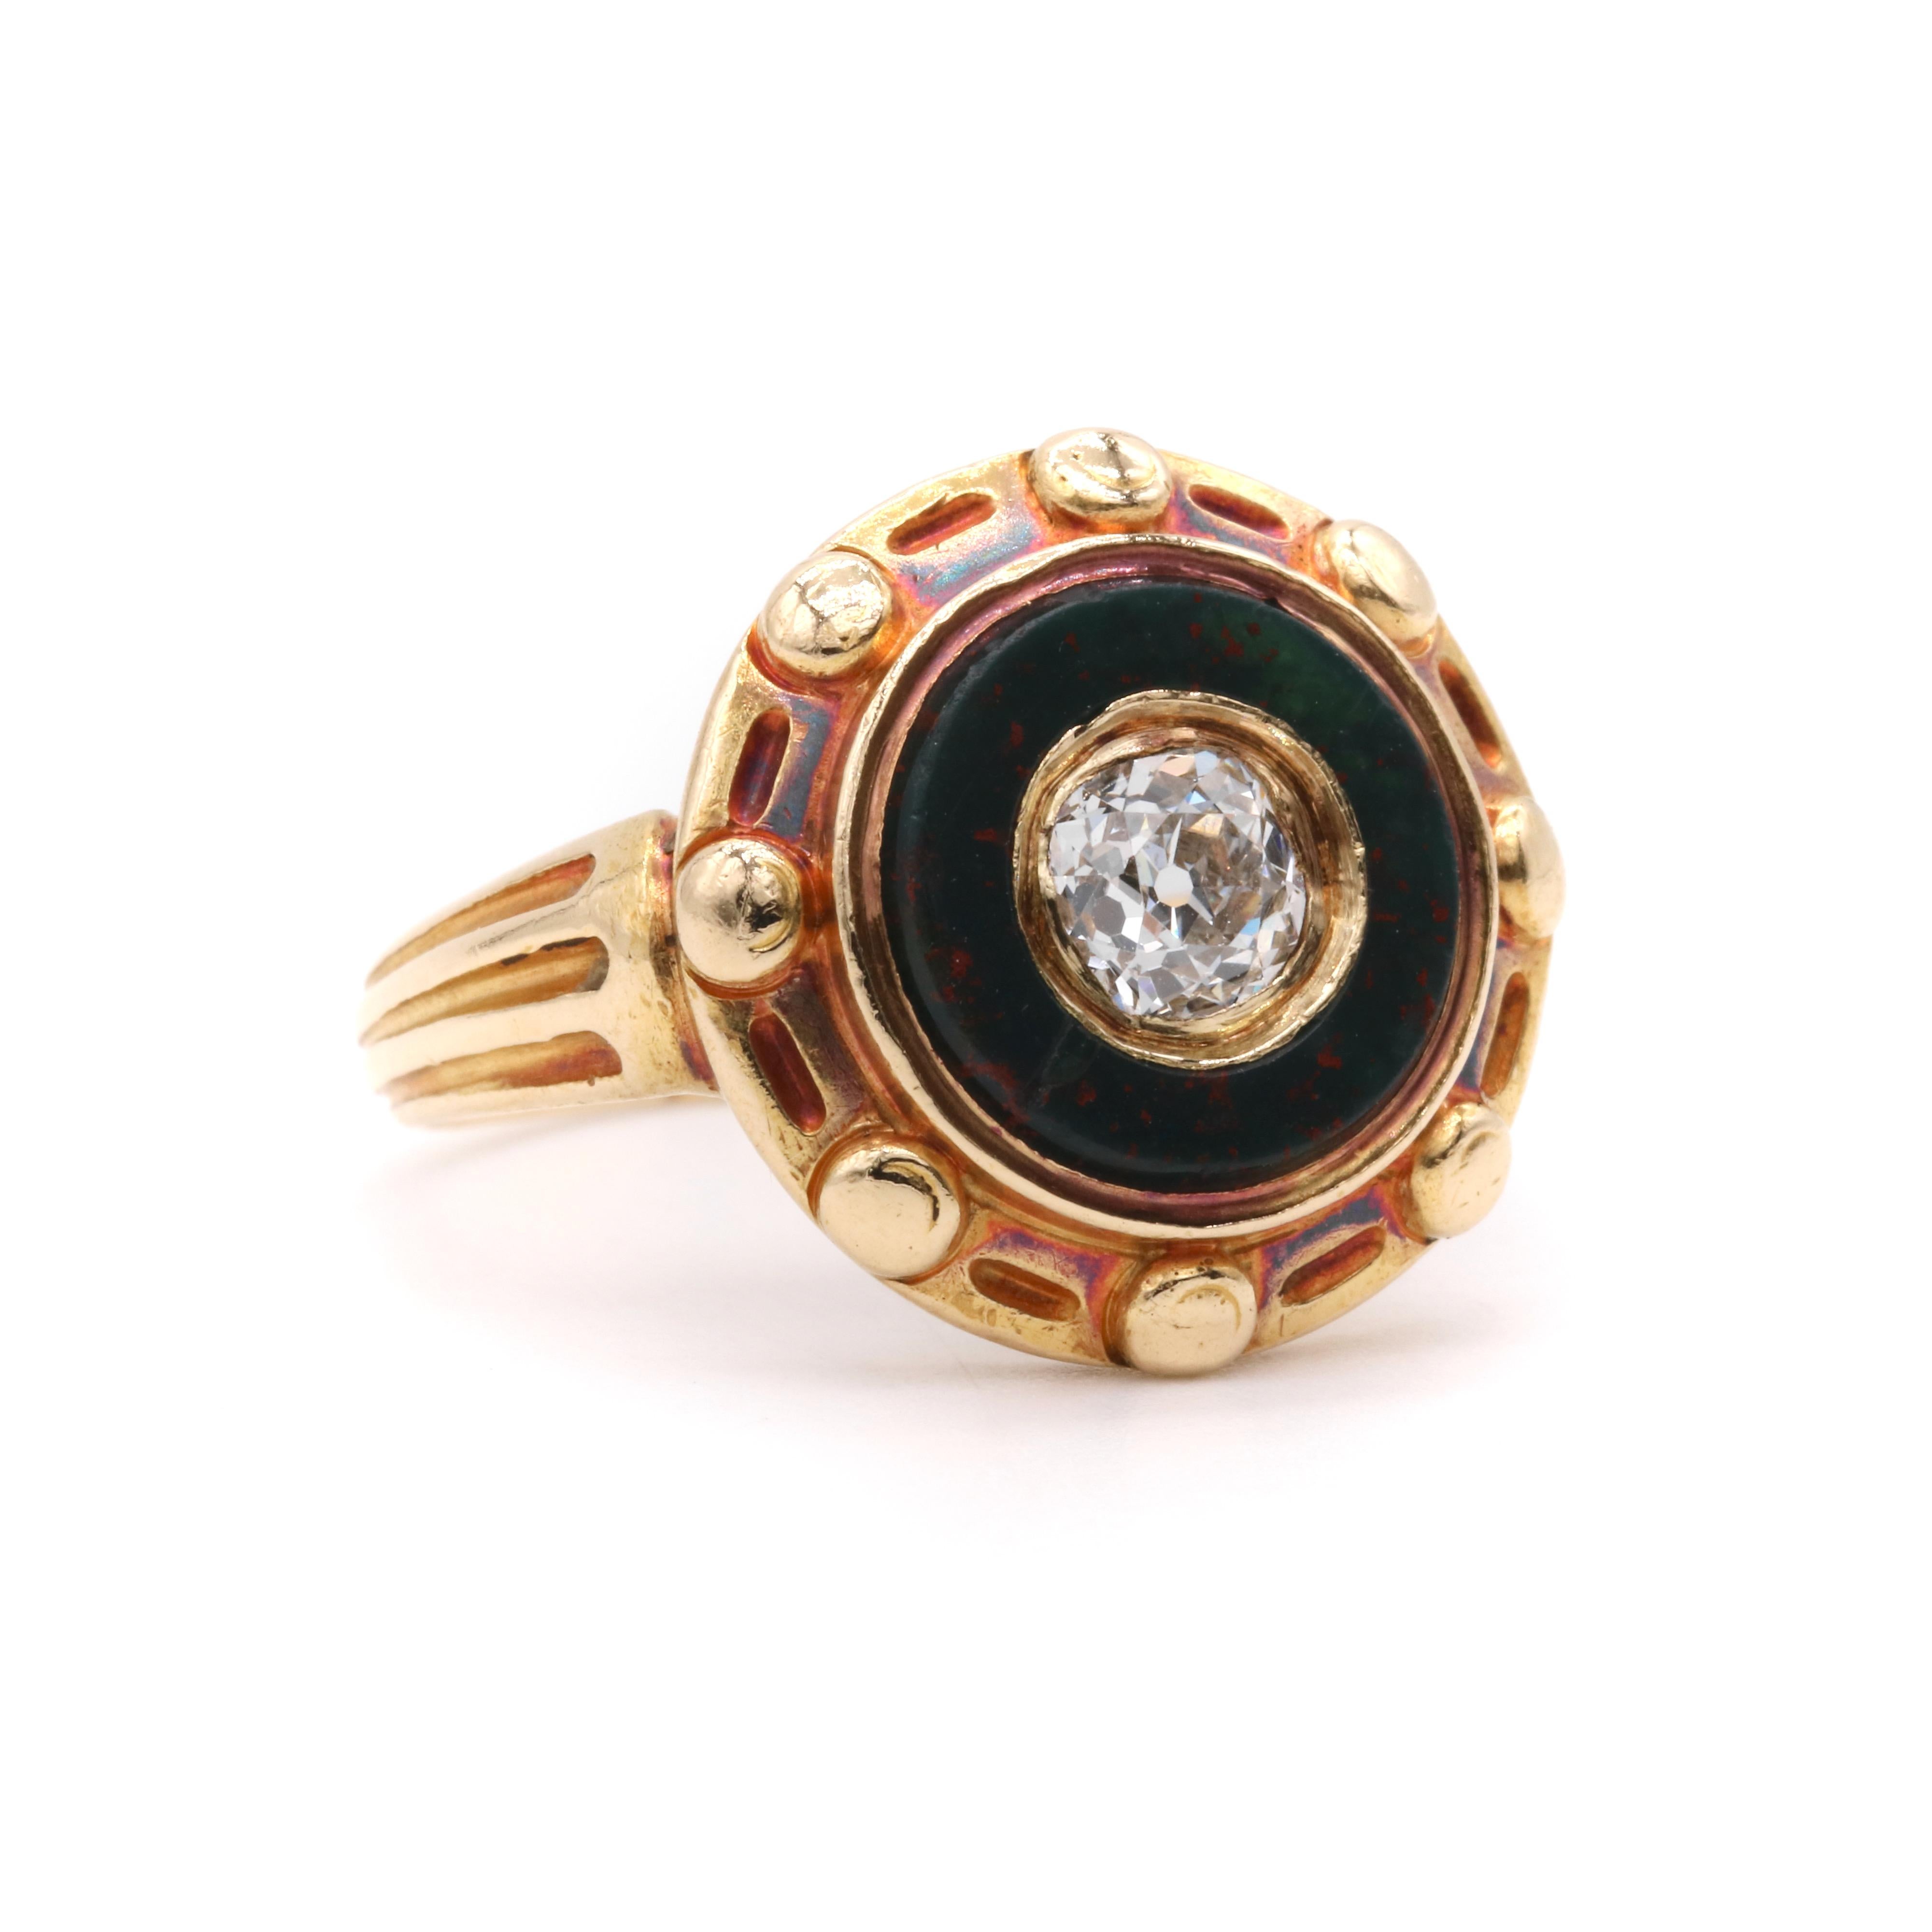 Women's or Men's Antique Victorian 1850s 18K Yellow Gold 0.53ct Diamond & Bloodstone Target Ring For Sale